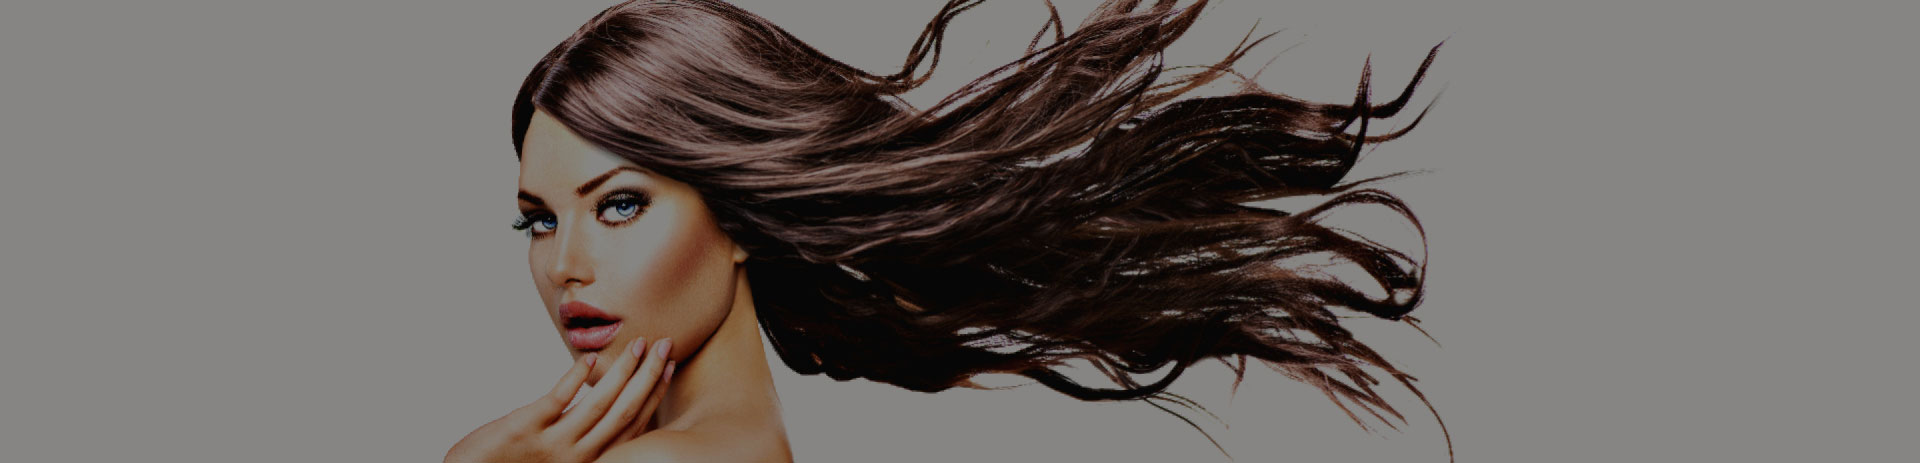 Best Rated Hair Extensions Salon in Davie, Florida